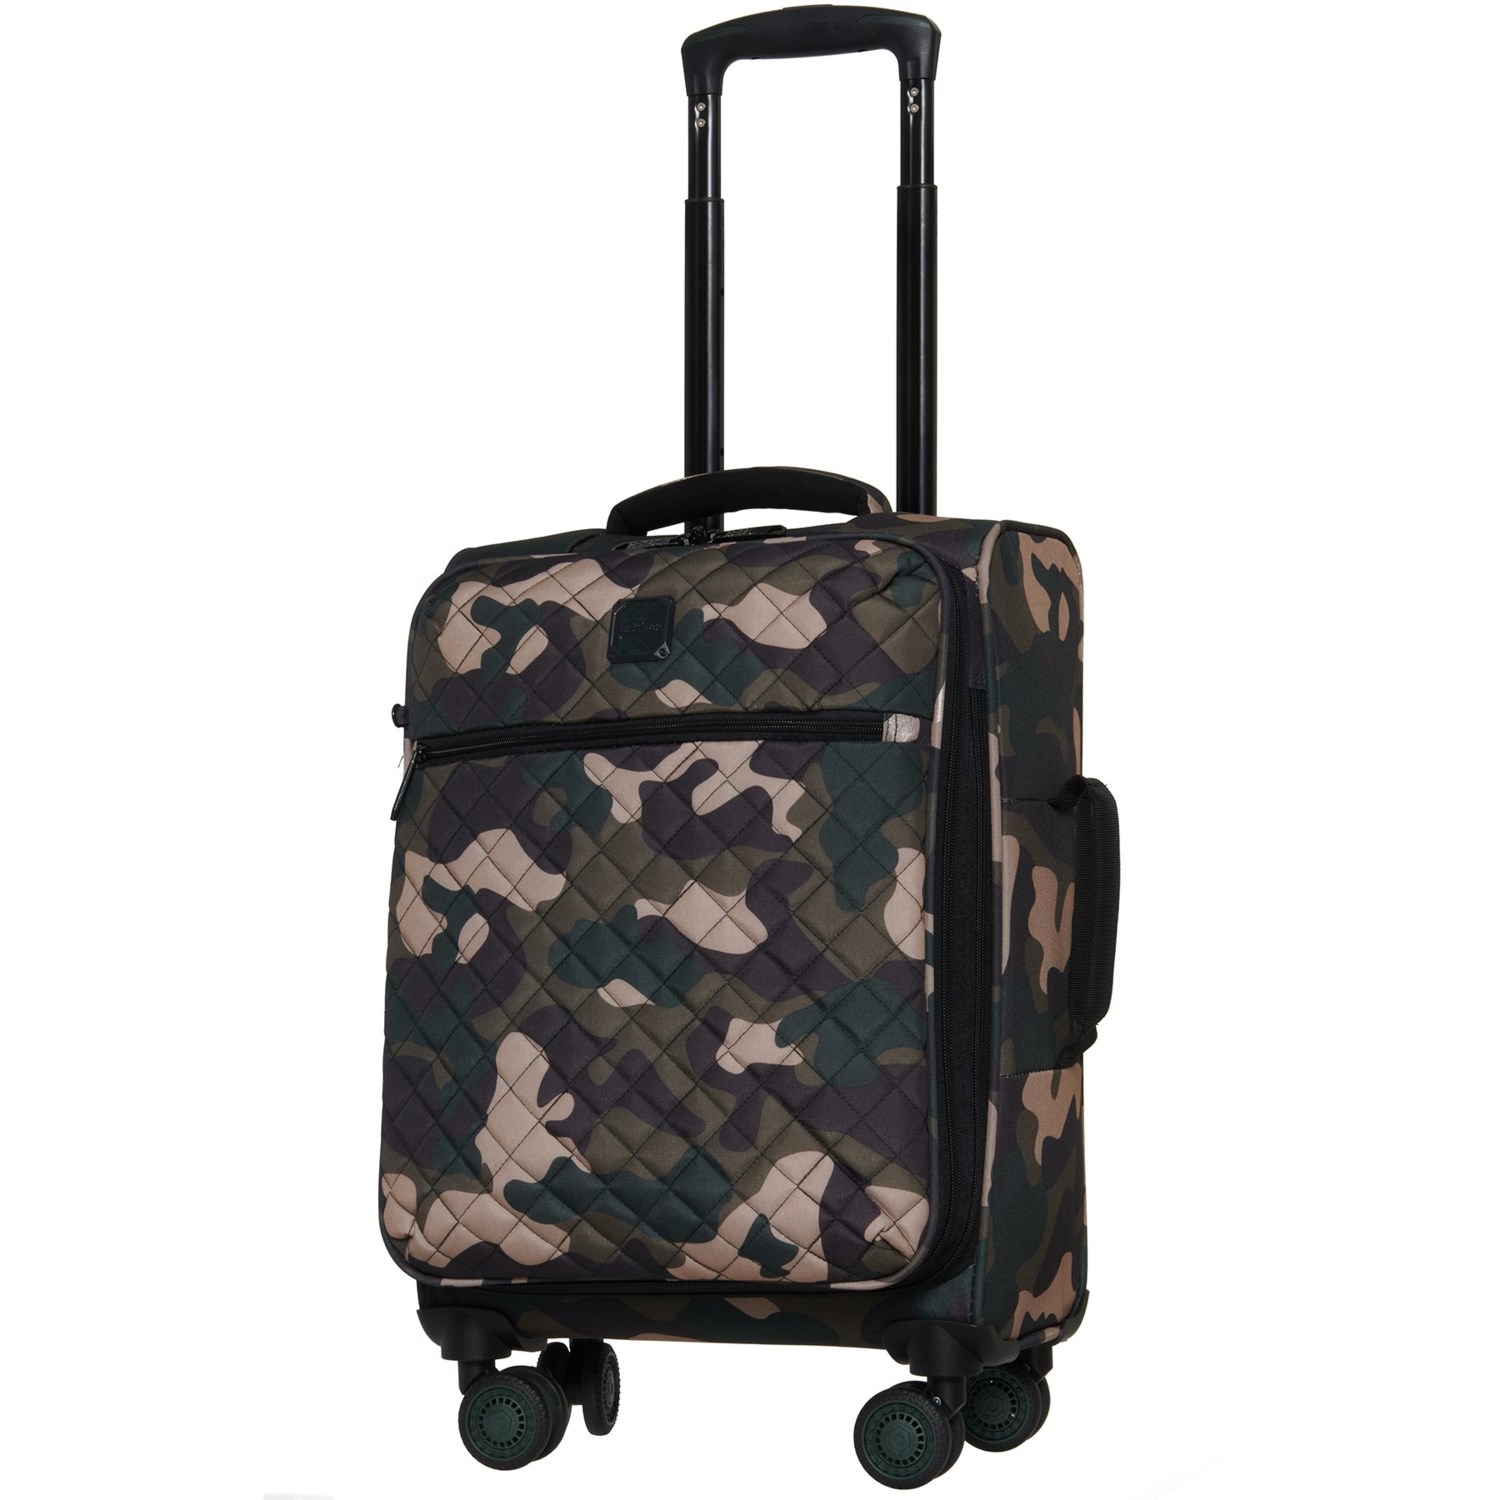 BritBag 21.7” Aberdare Spinner Carry-On Suitcase - Softside, Expandable, Dark Brown Camo